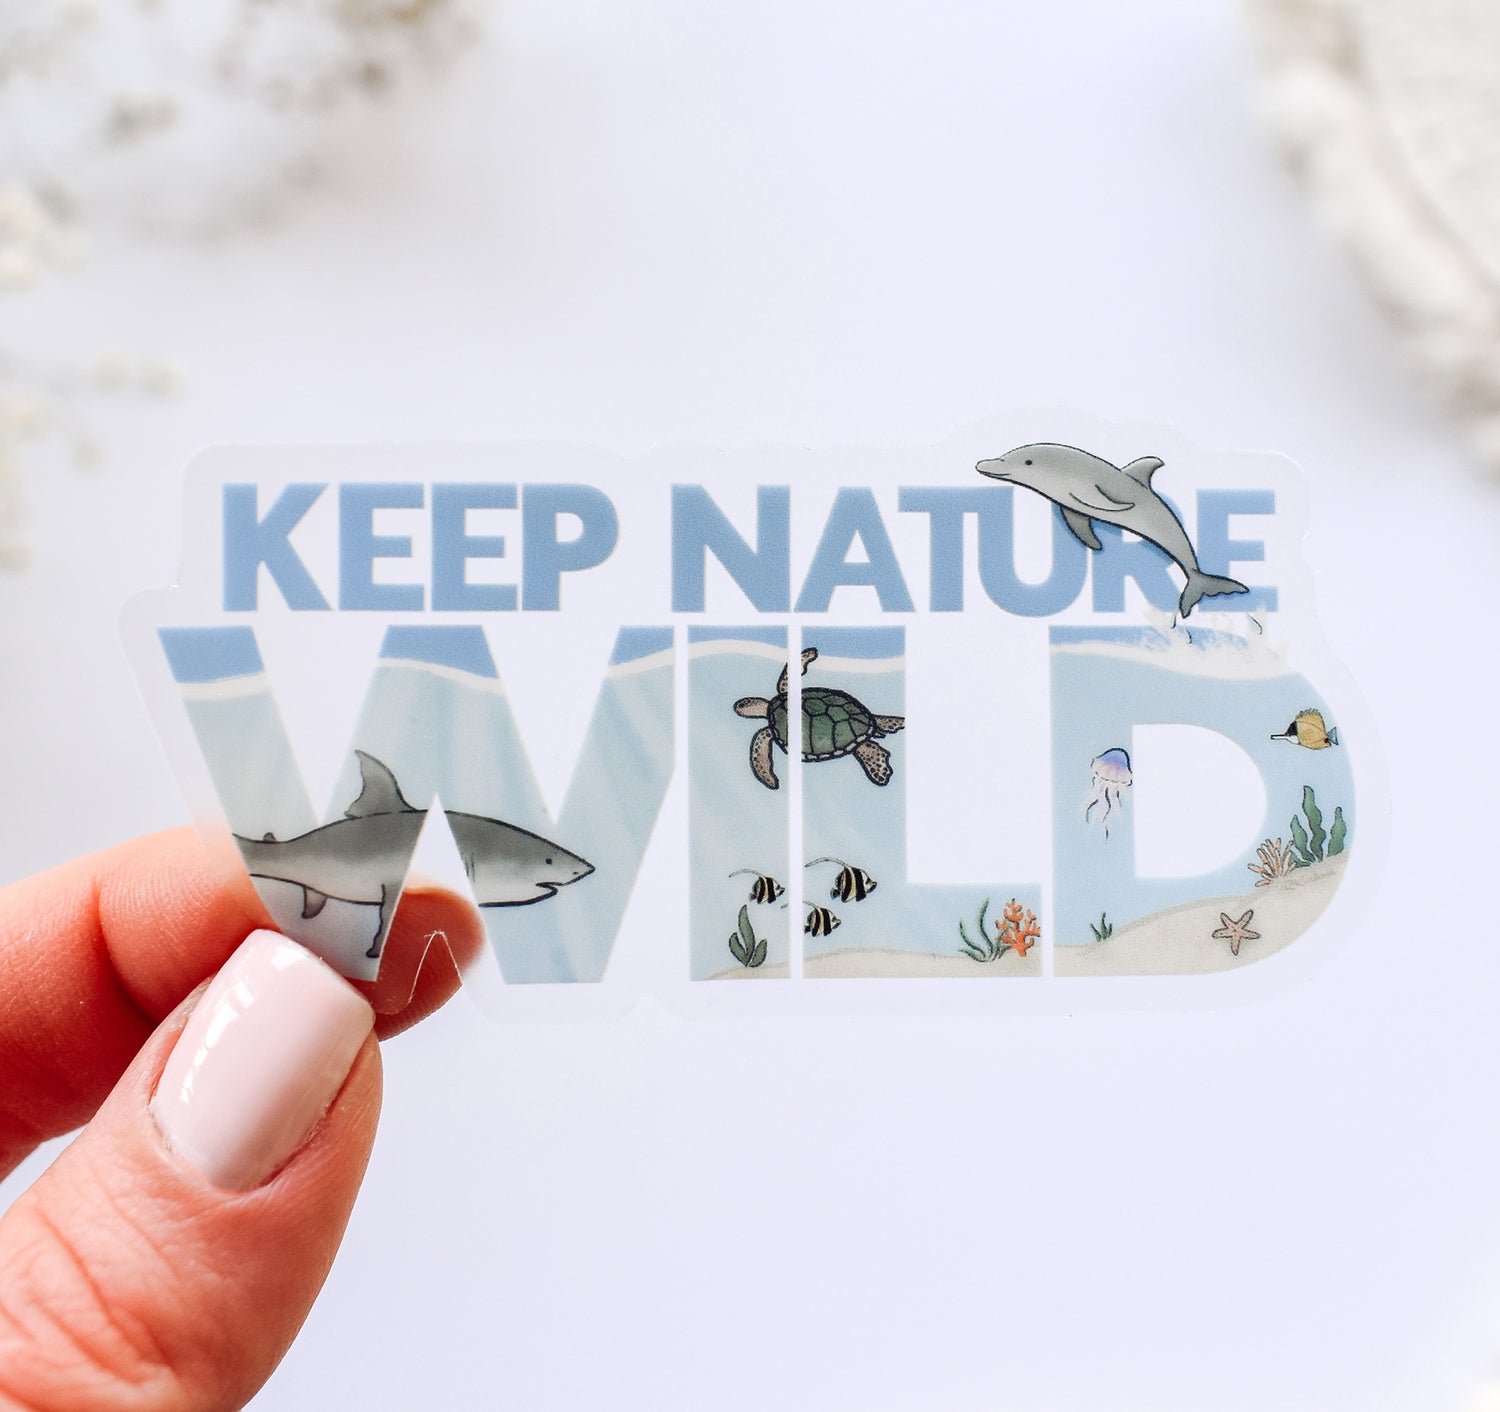 Keep Nature Wild clear vinyl sticker with a great white shark, bottlenose dolphin, green sea turtle, jellyfish, and various fish swimming in the ocean